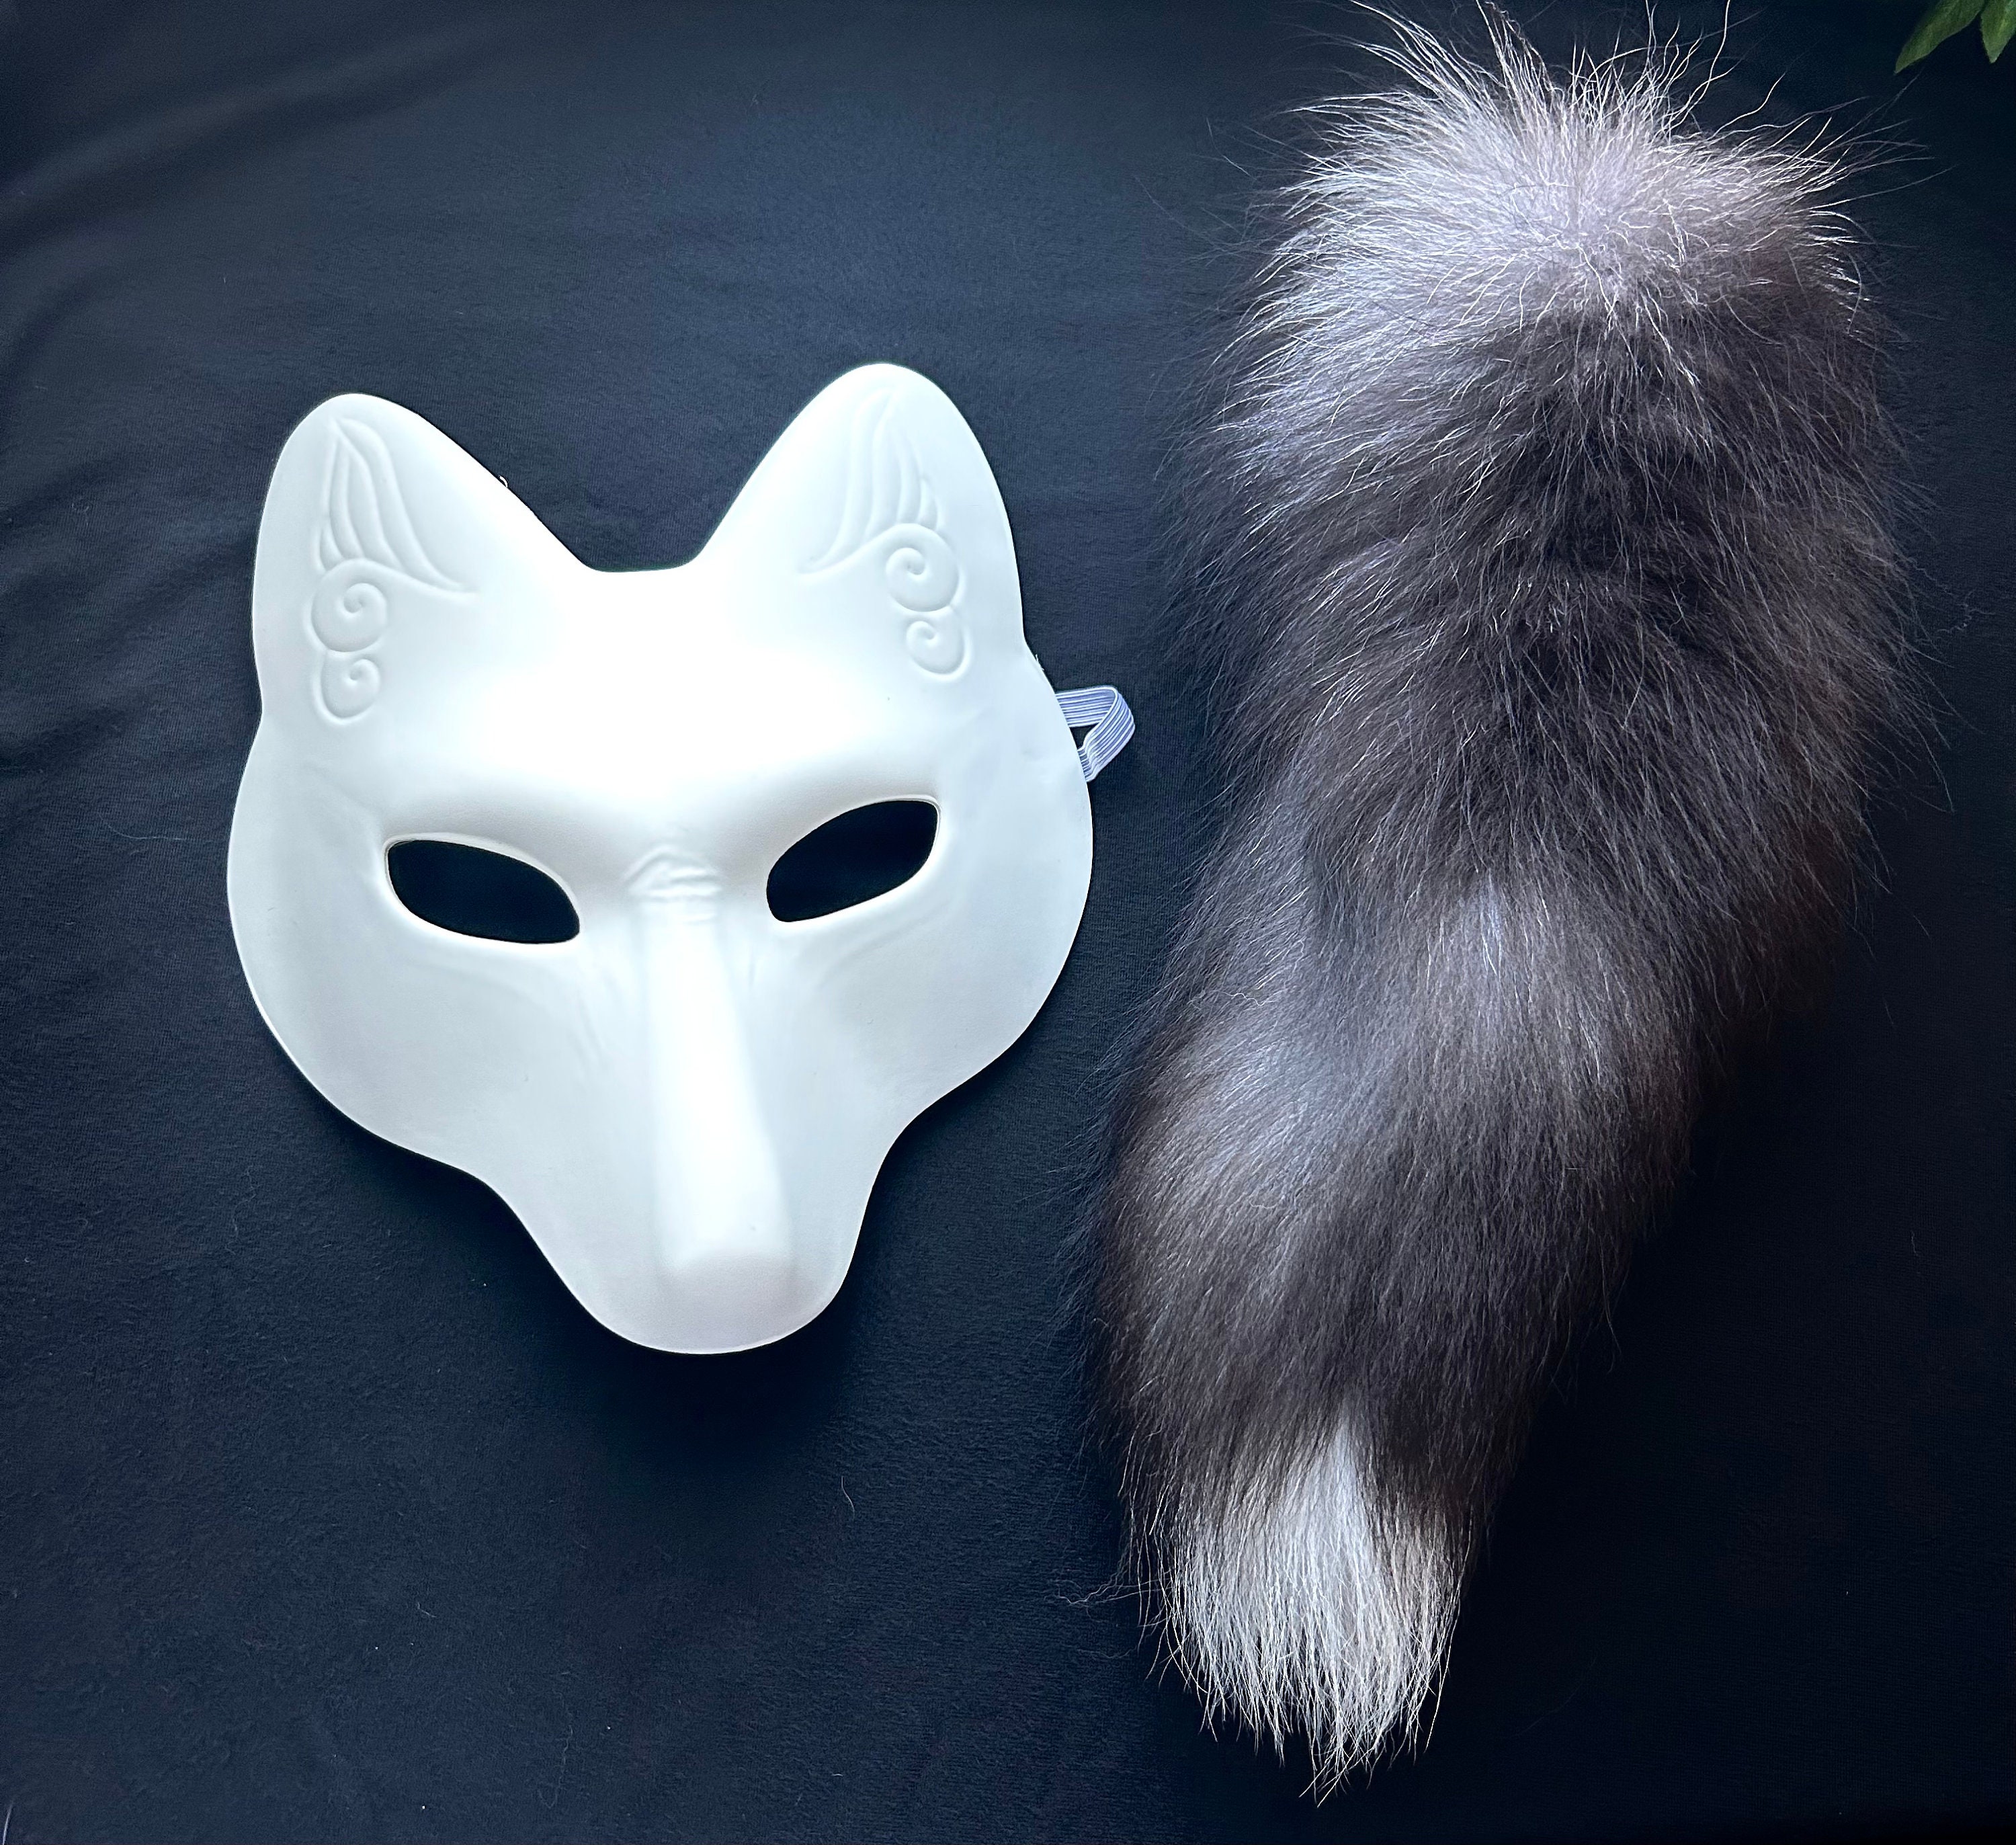 Therian Set Wolf Therian Mask, Silver Fox Tail Keychain 